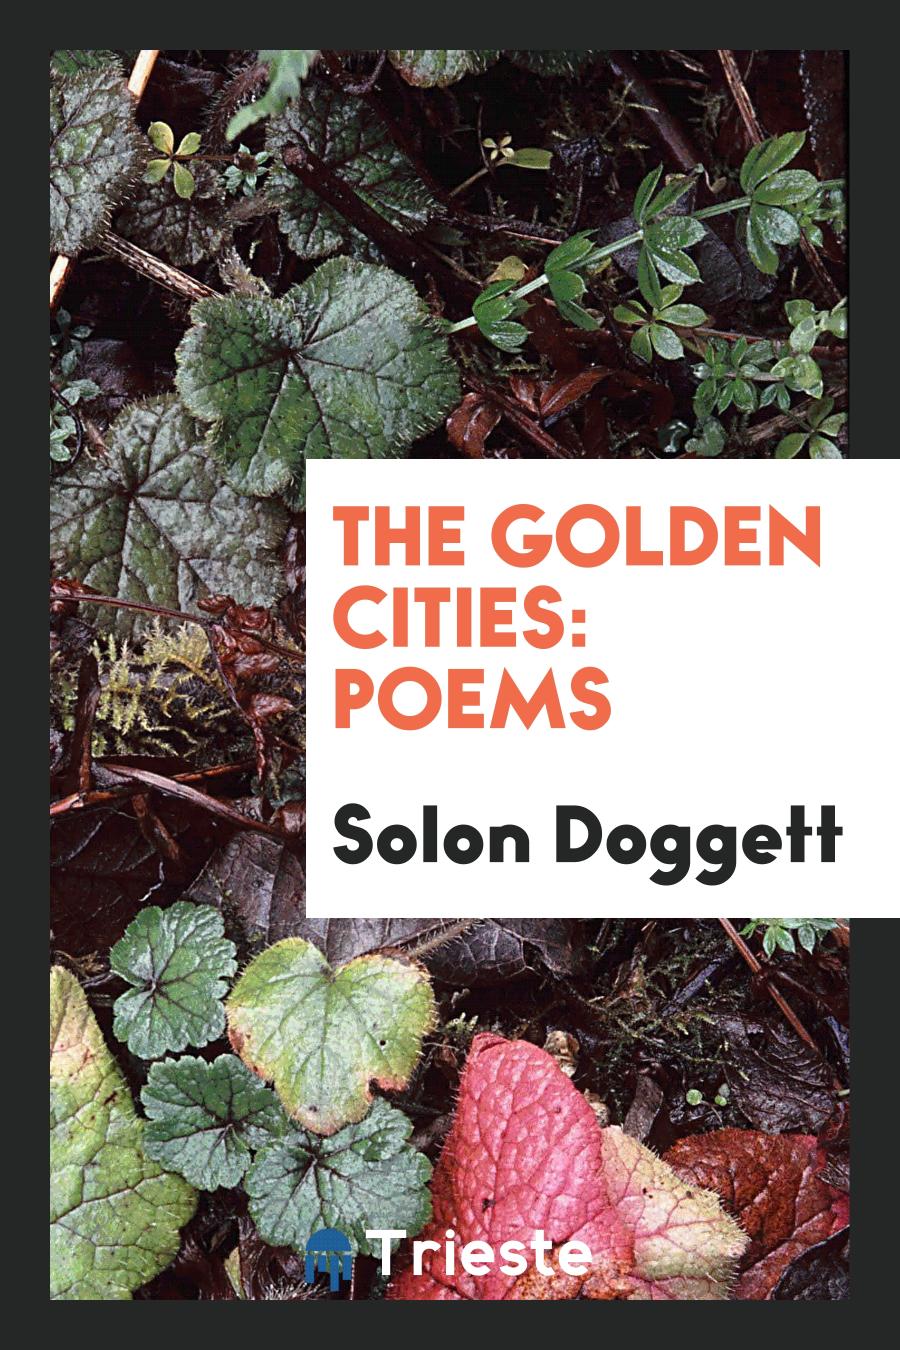 The Golden Cities: Poems